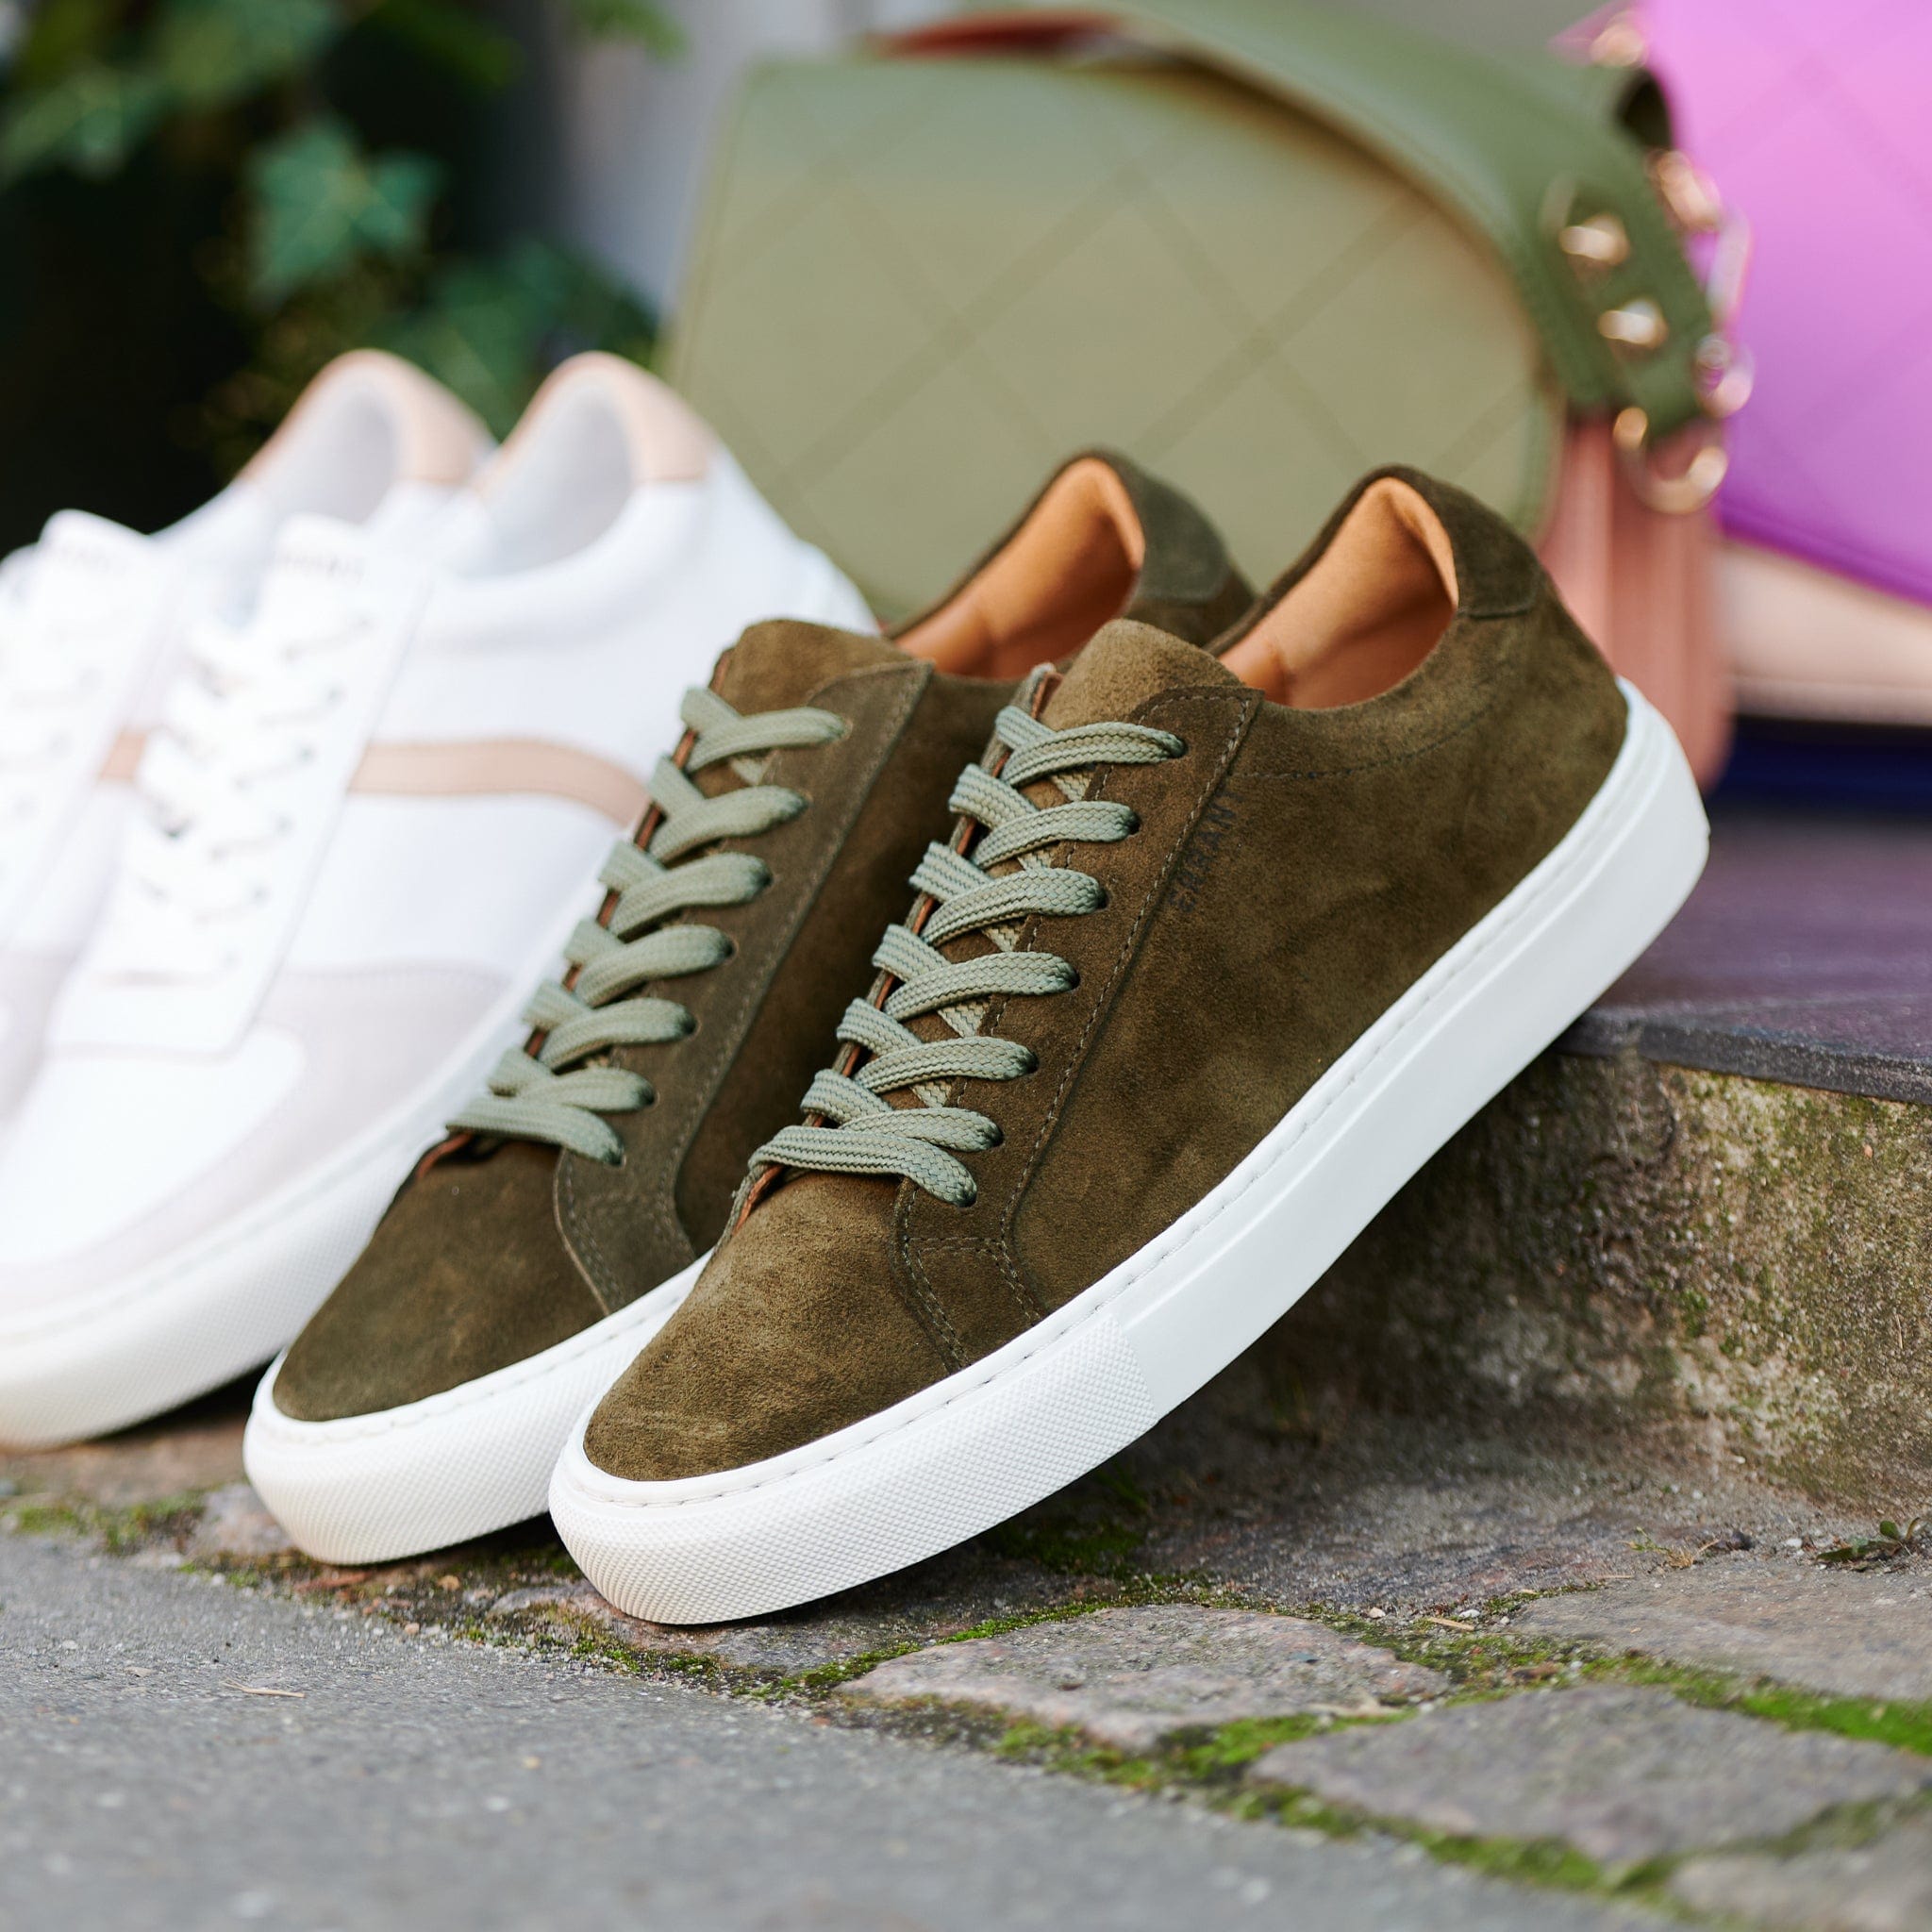 Essential Sneaker - Olive (Dame)